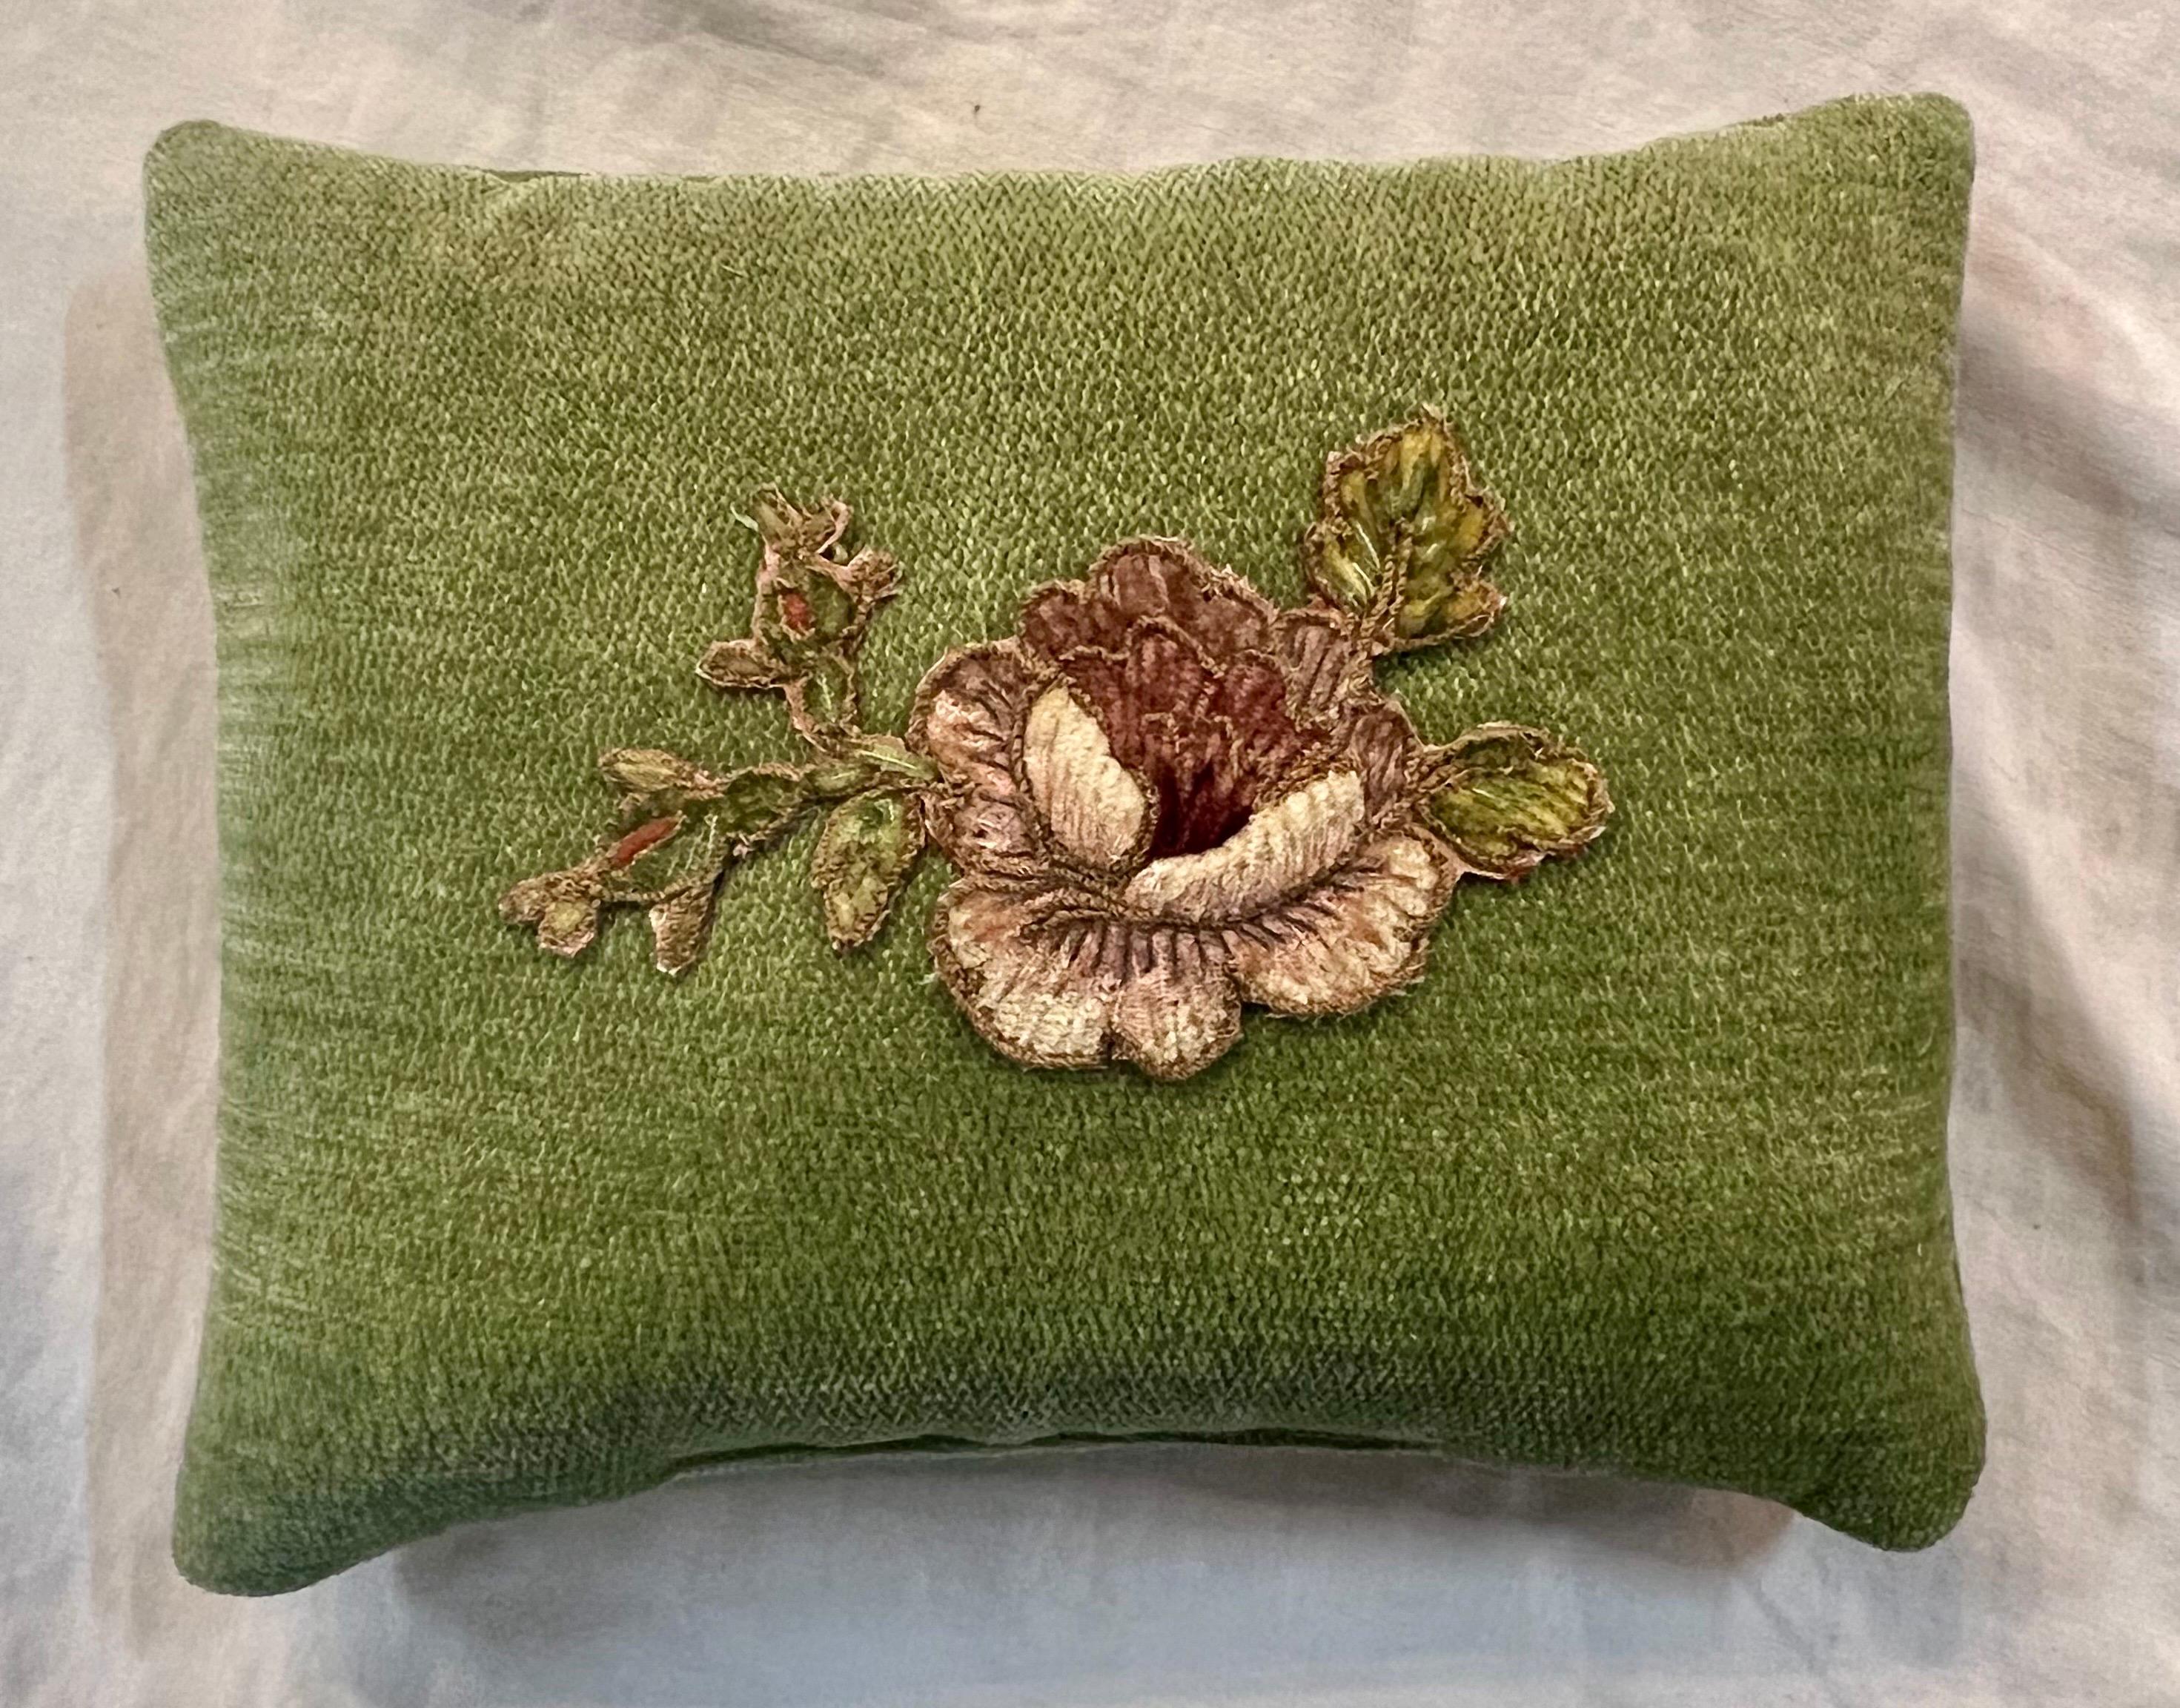 A beautifully crafted lavender sachet with intricate details.  The green velvet paired with a 19-century French metallic & chenille flower create a unique and elegant piece.